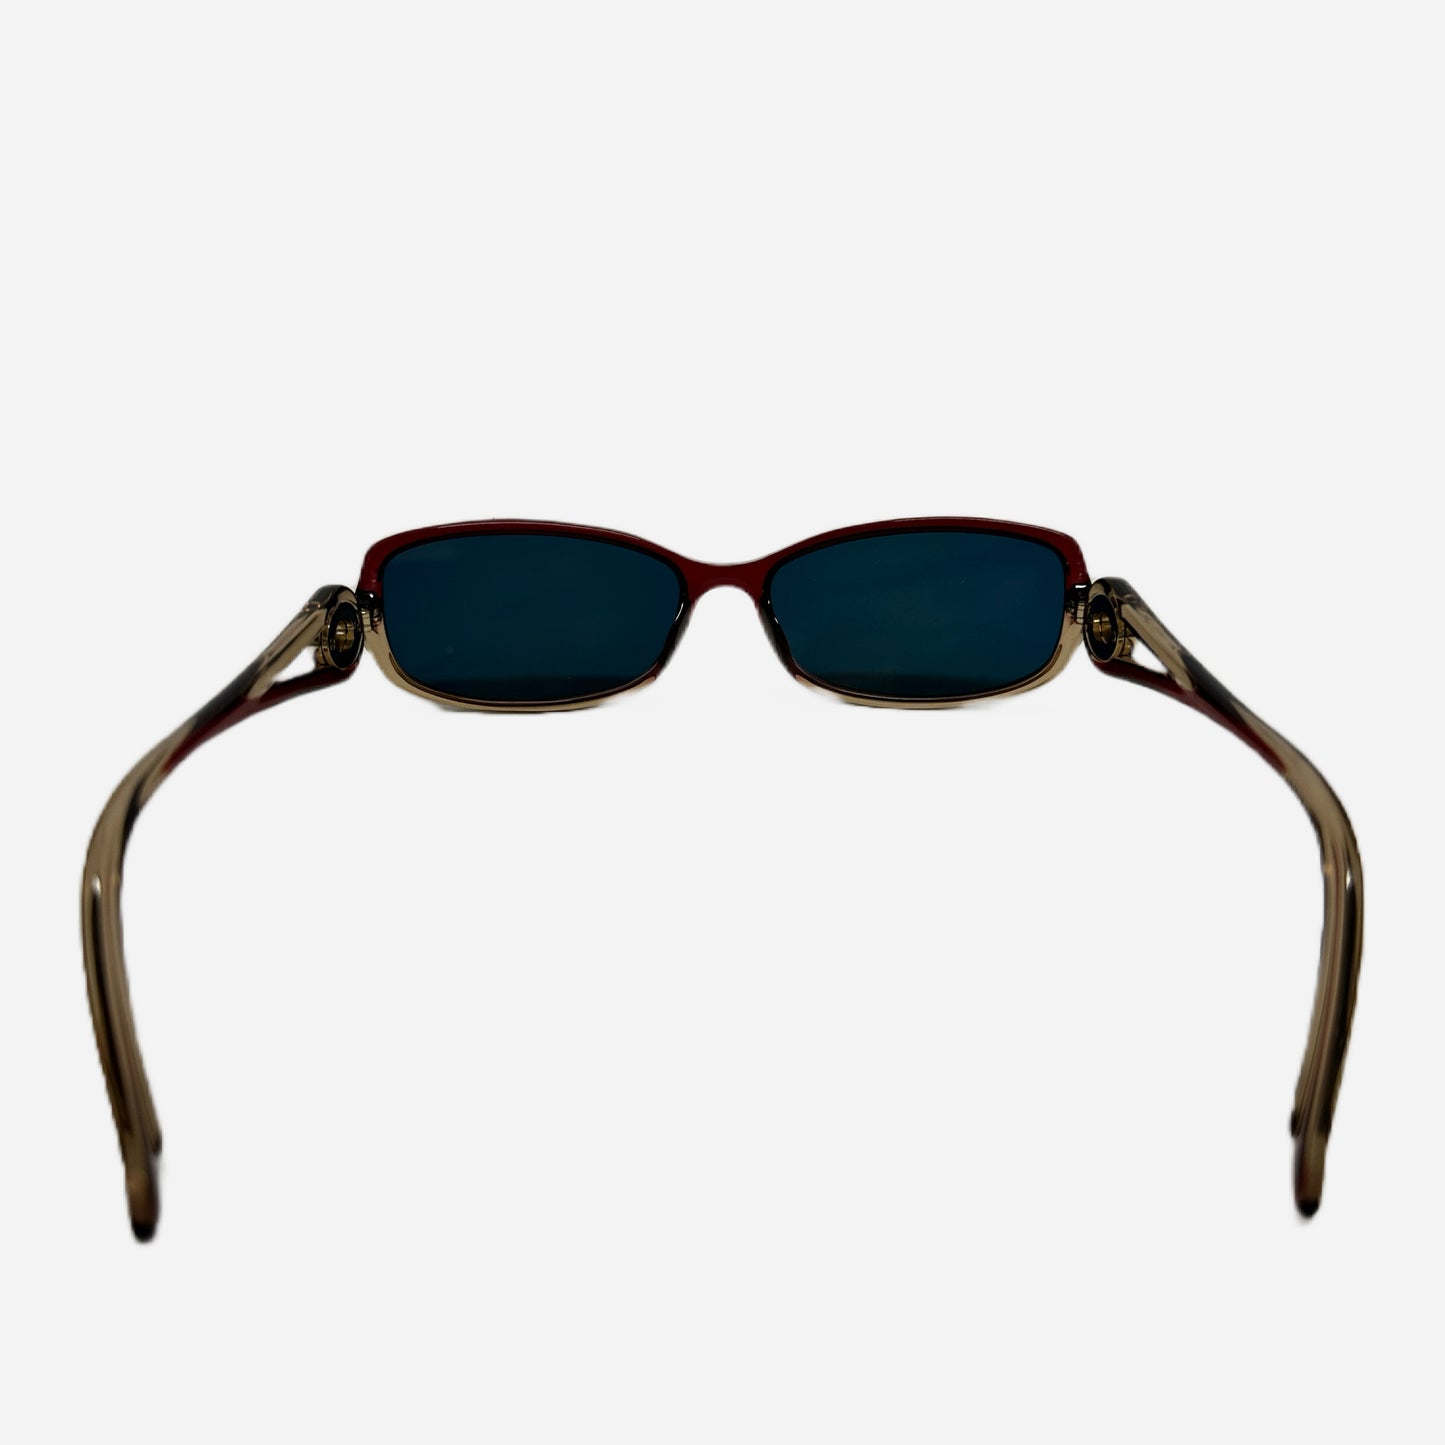 Vintage-Christian-Dior-Sonnenbrille-Sonnenbrille-3216-Optyl-The-Seekers-back-1